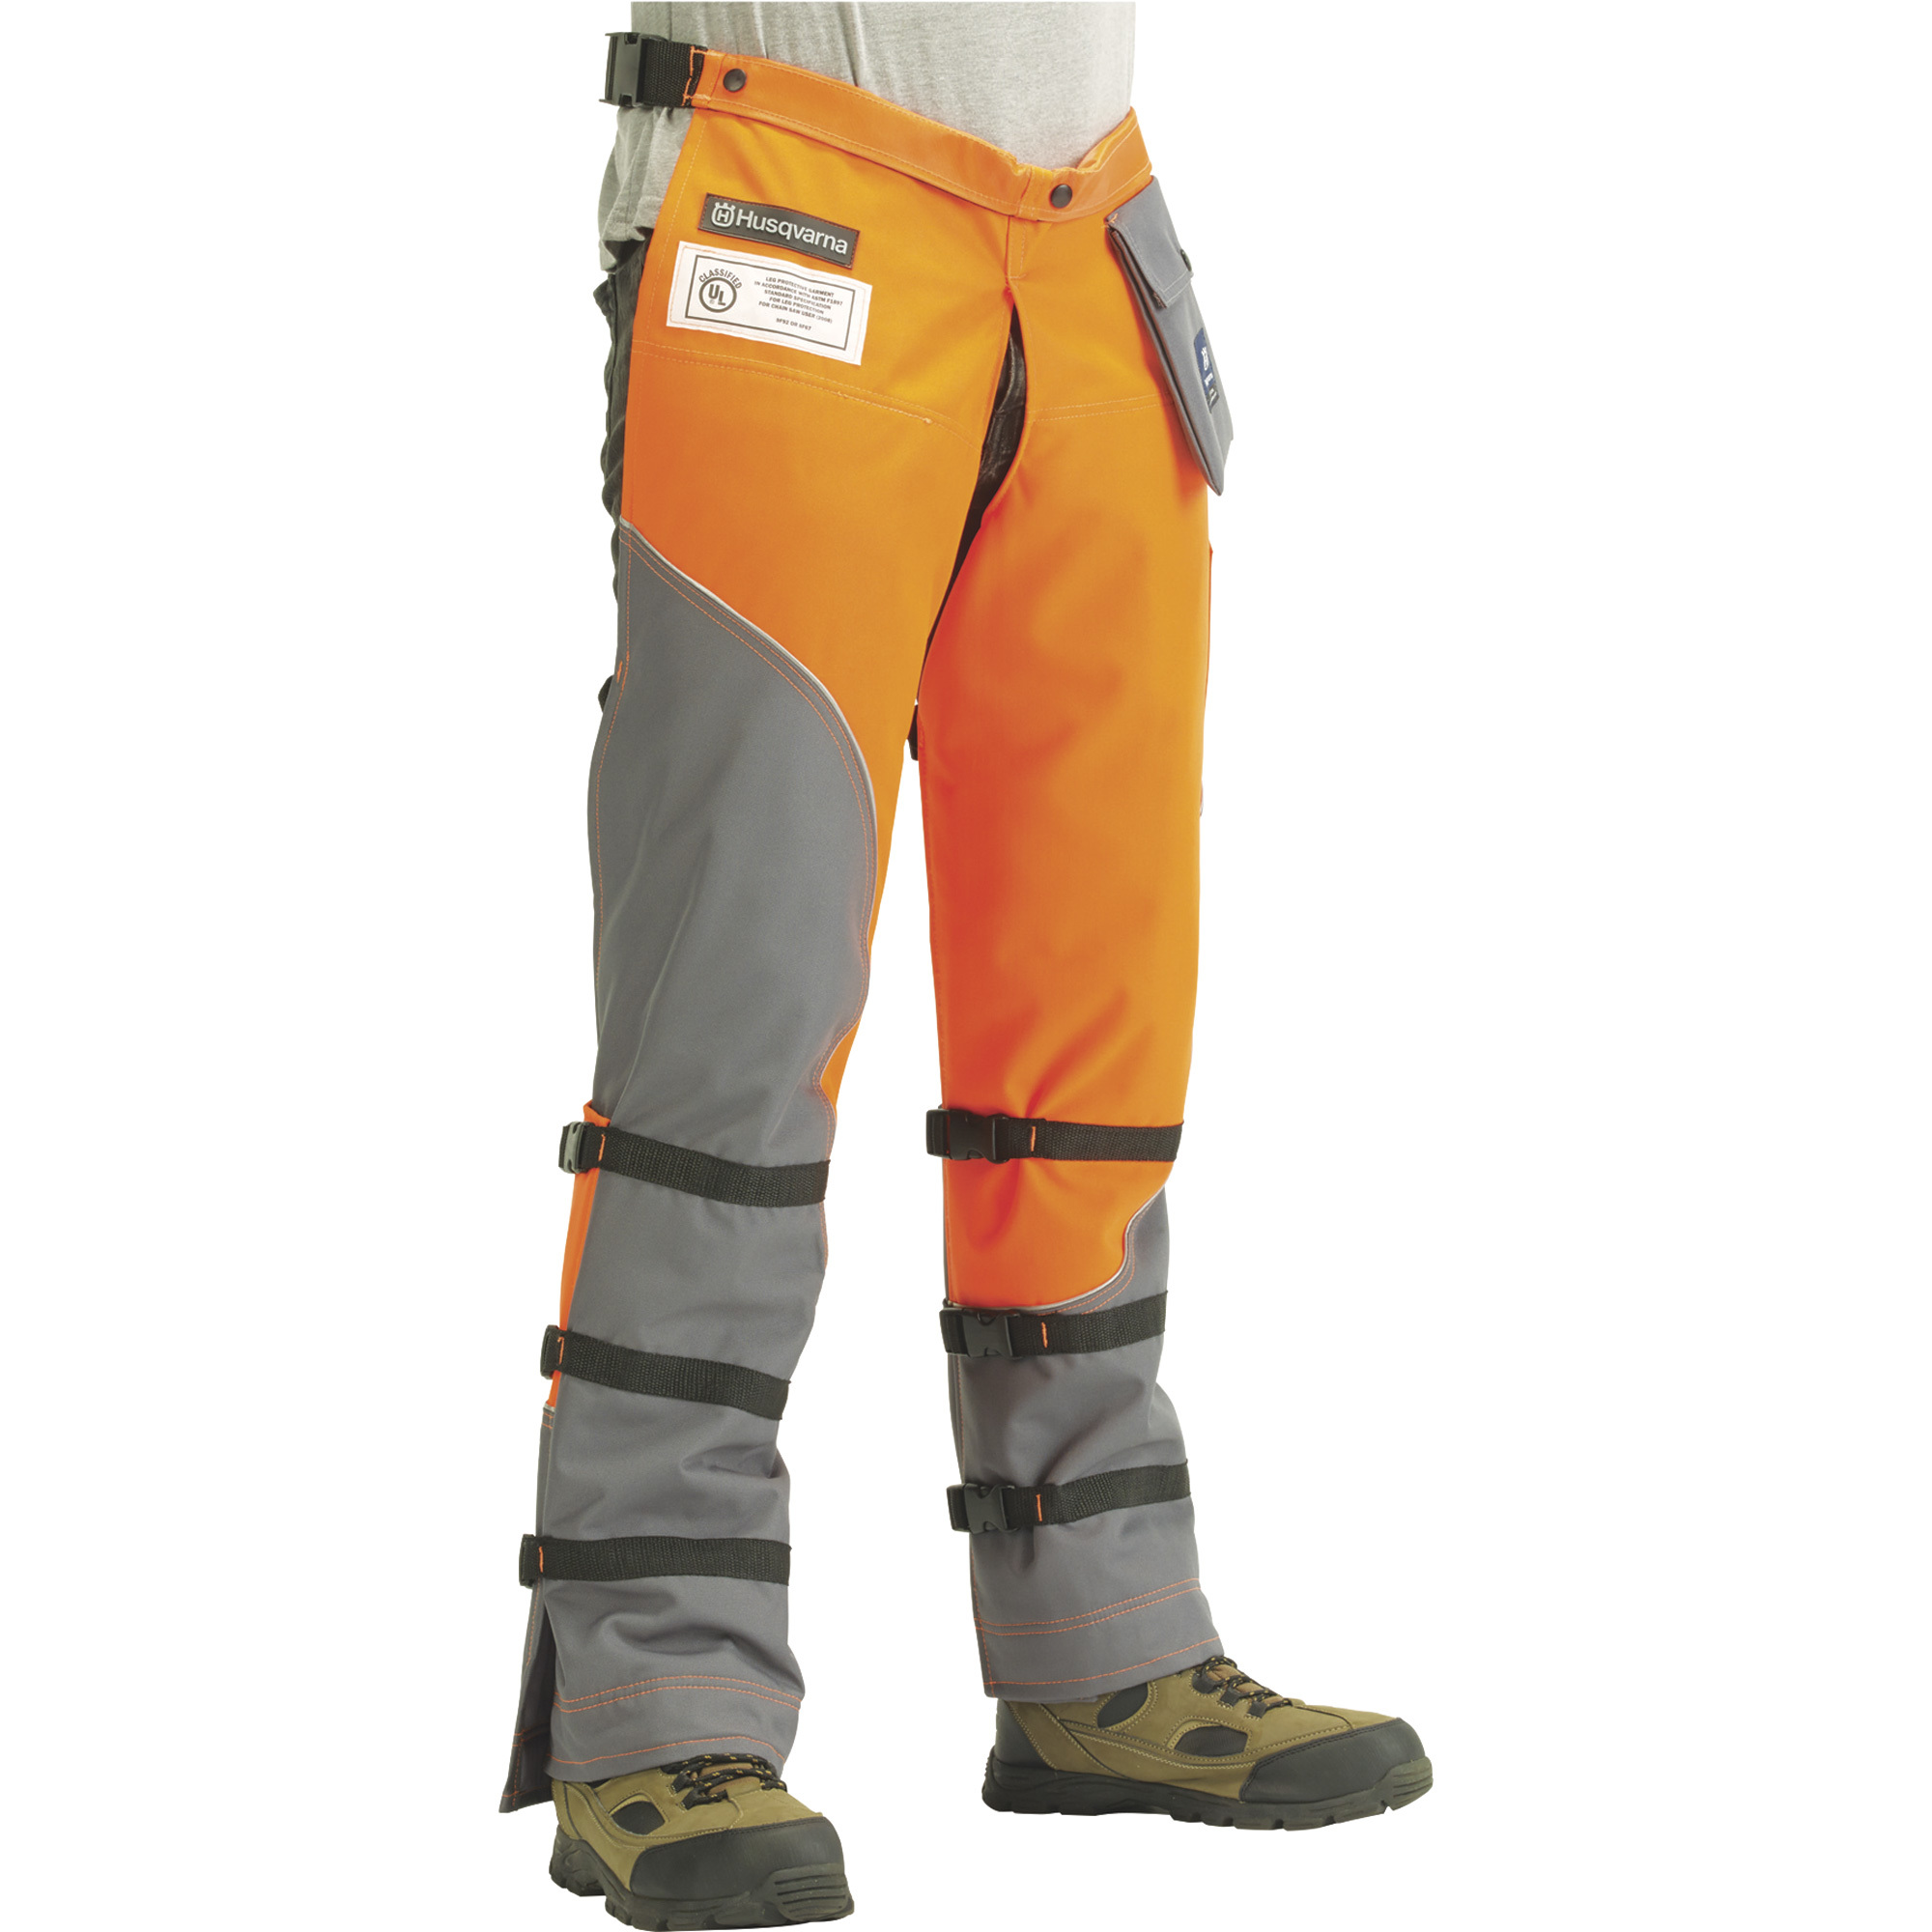 Husqvarna Forest Protective Chainsaw Chaps â Size 40â42, Model 585488005